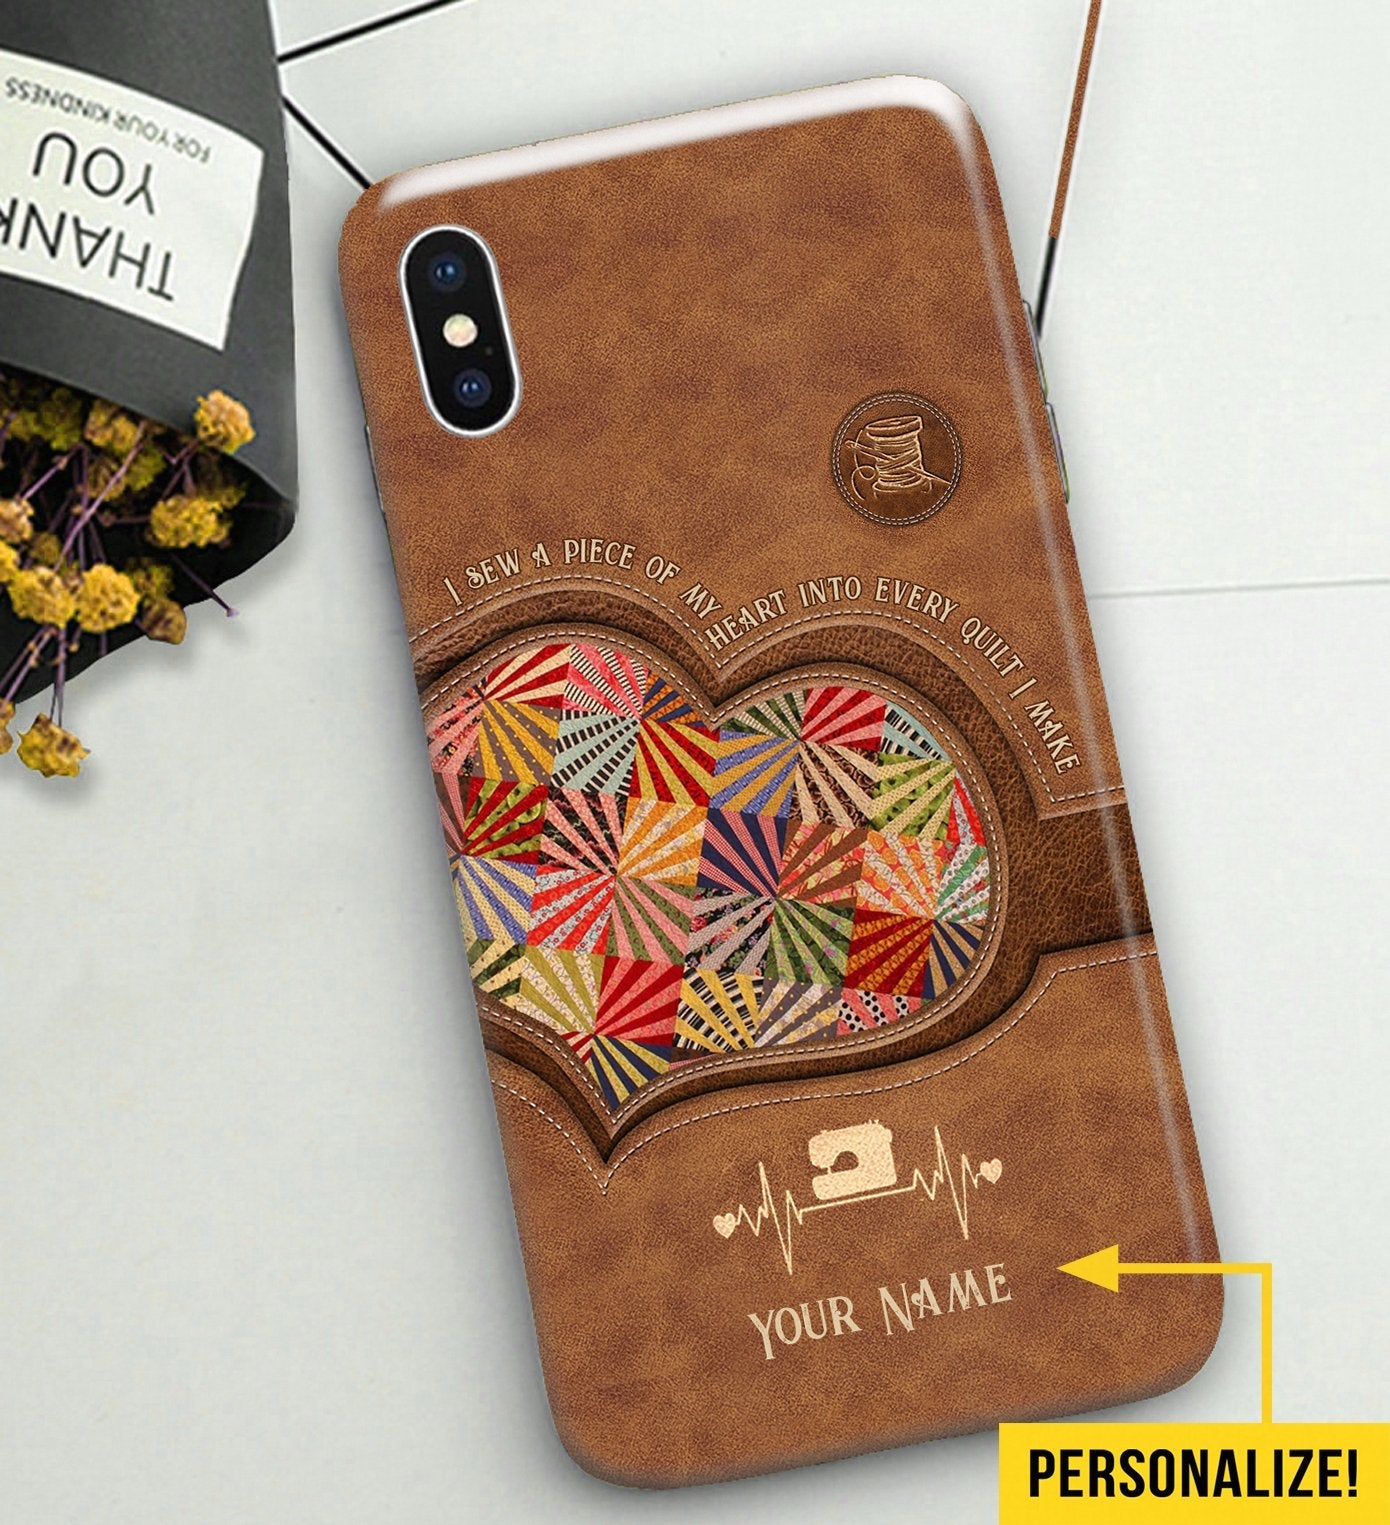 I Sew A Piece Of My Heart - Quilting Personalized Leather Pattern Print Phone Case